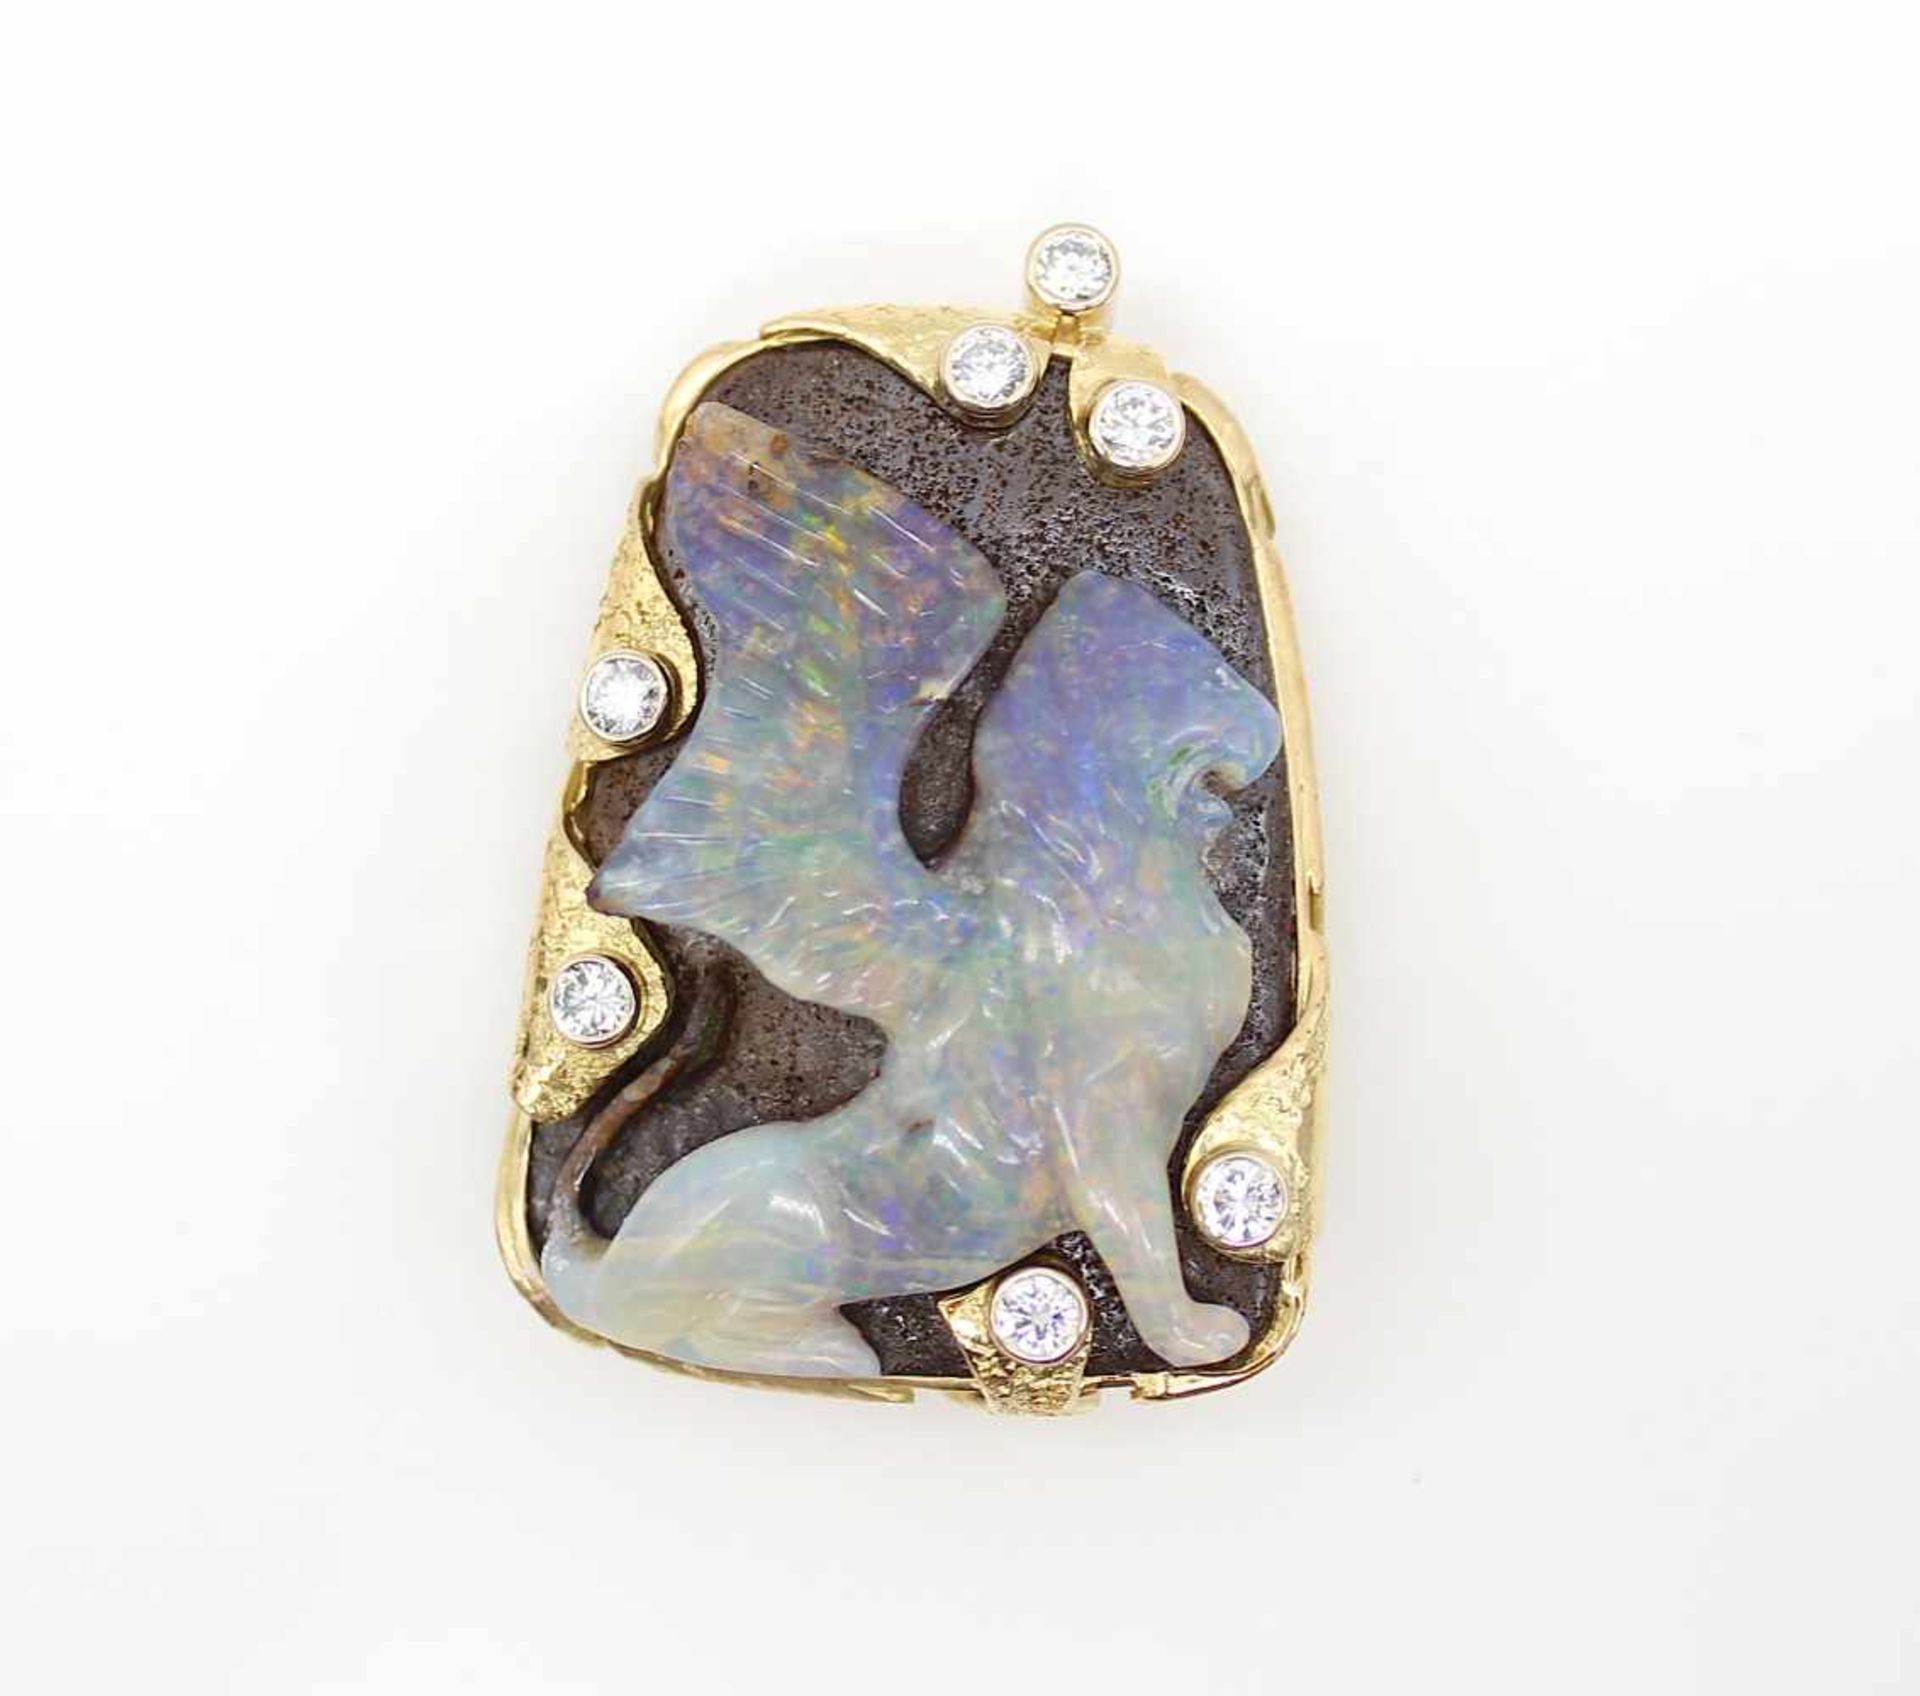 Pendant / brooch made of 750 gold with an opal and brilliants, approx. 0.50 ct in high quality. - Bild 2 aus 2